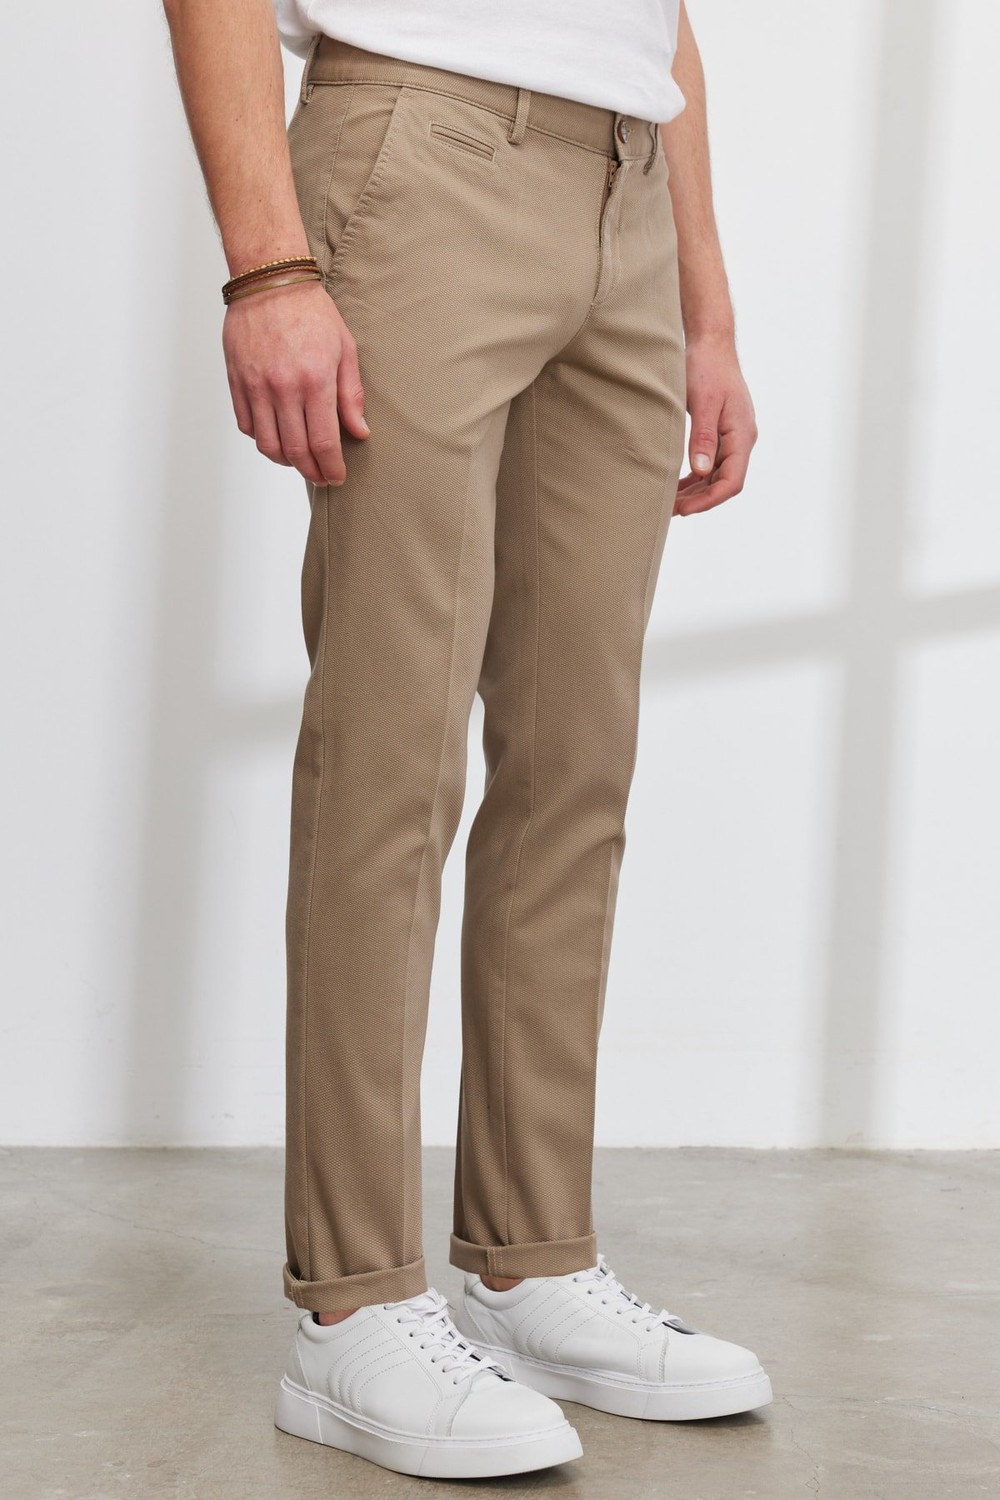 ALTINYILDIZ CLASSICS Men's Beige Slim Fit Slim Fit Trousers with Side Pockets, Cotton Stretchy Dobby Trousers.